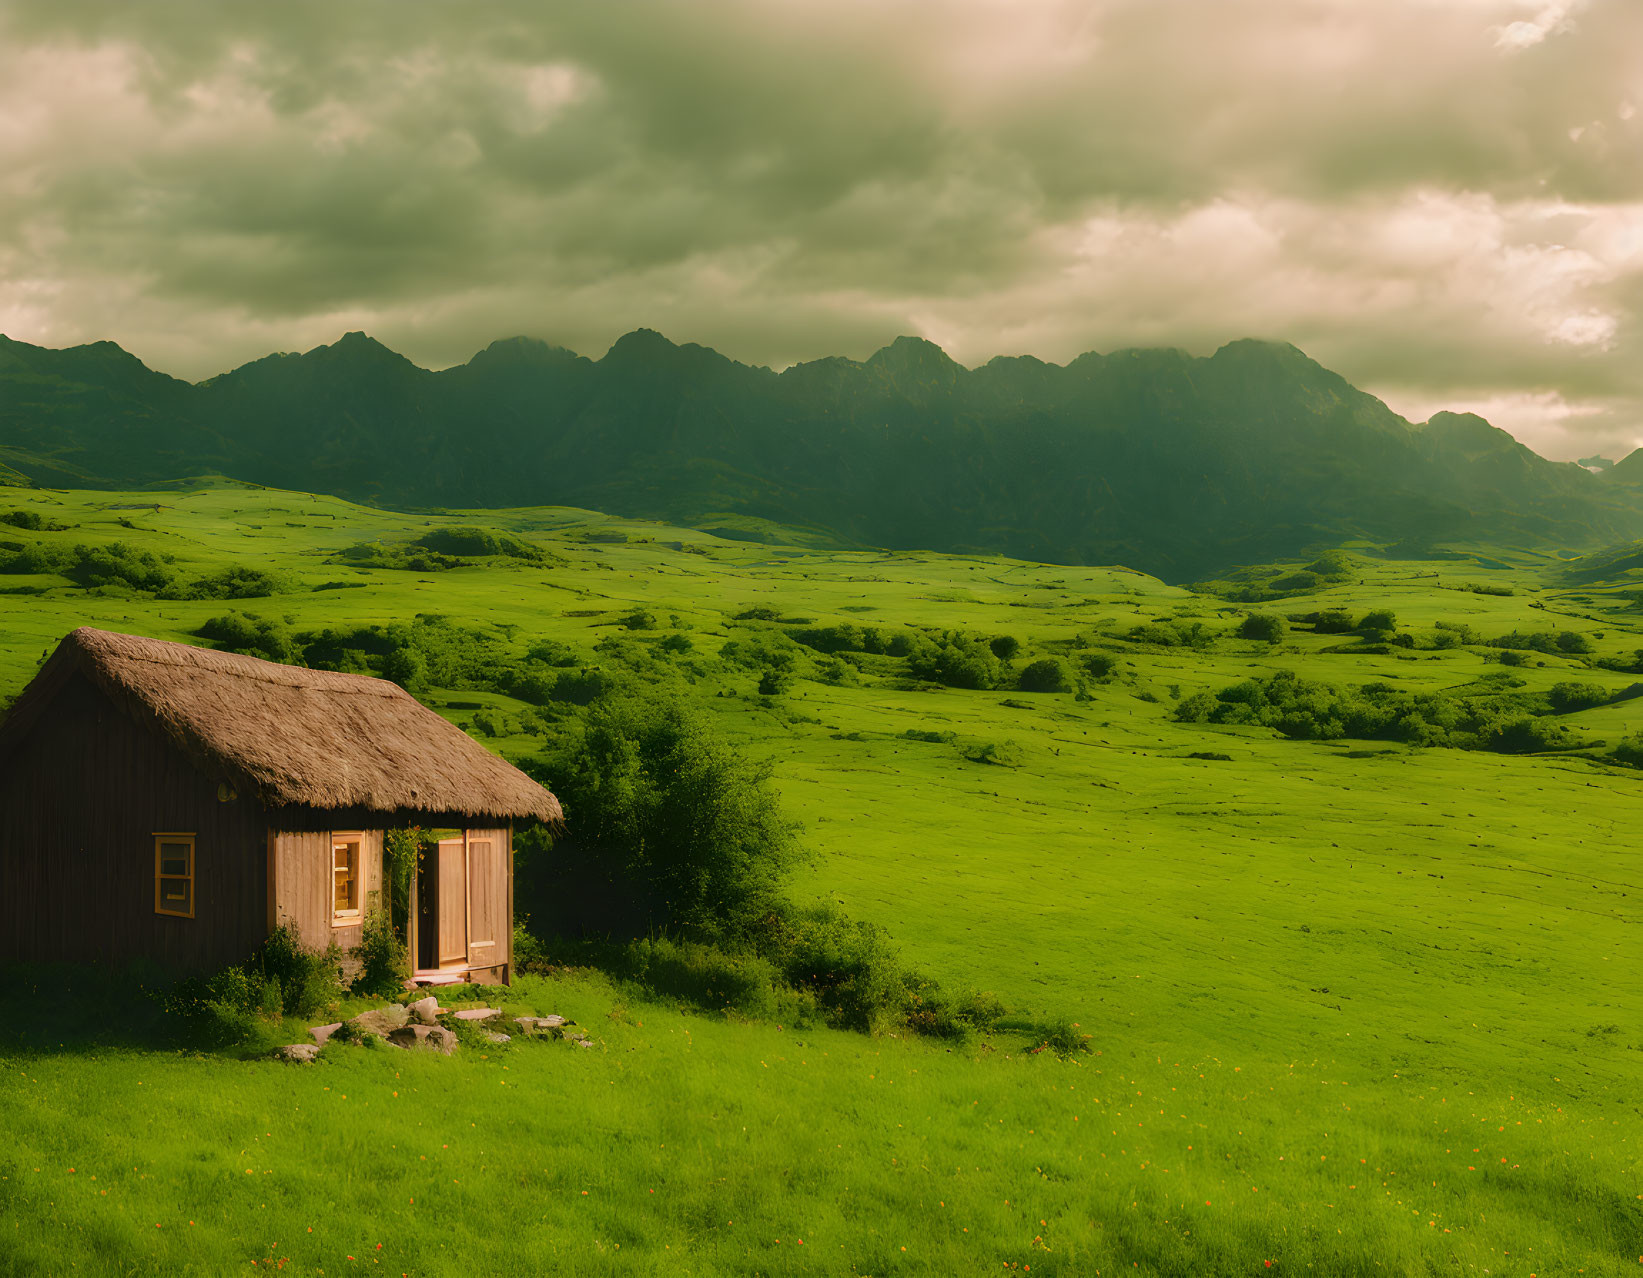 Rustic wooden cabin in green meadow with rolling hills & mountain range under cloudy sky